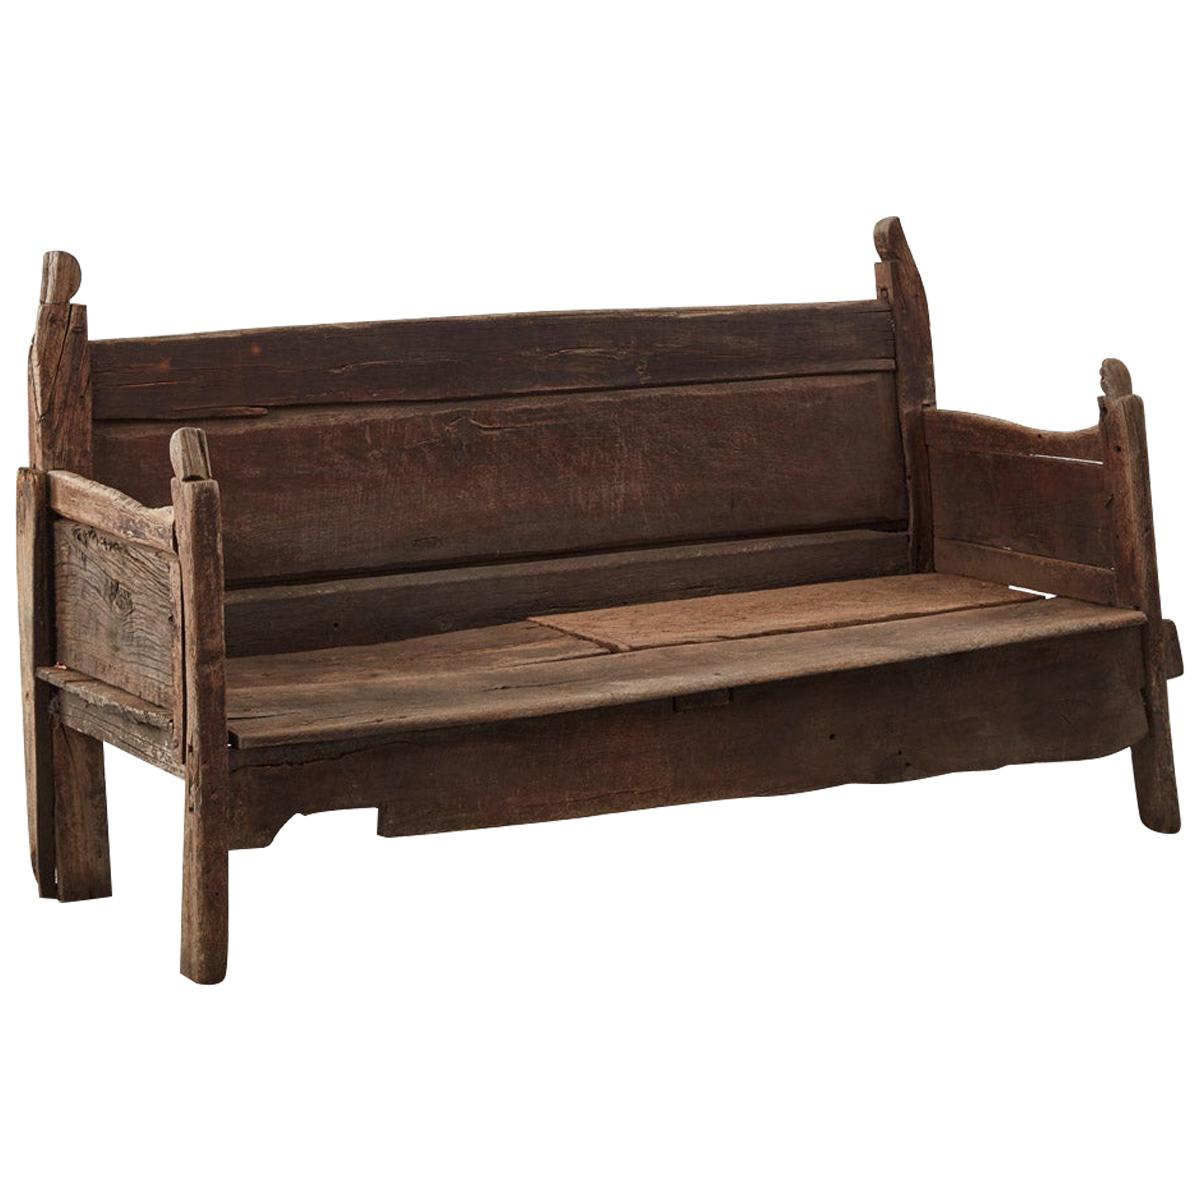 18th Century Weathered Galician Bench, Spain